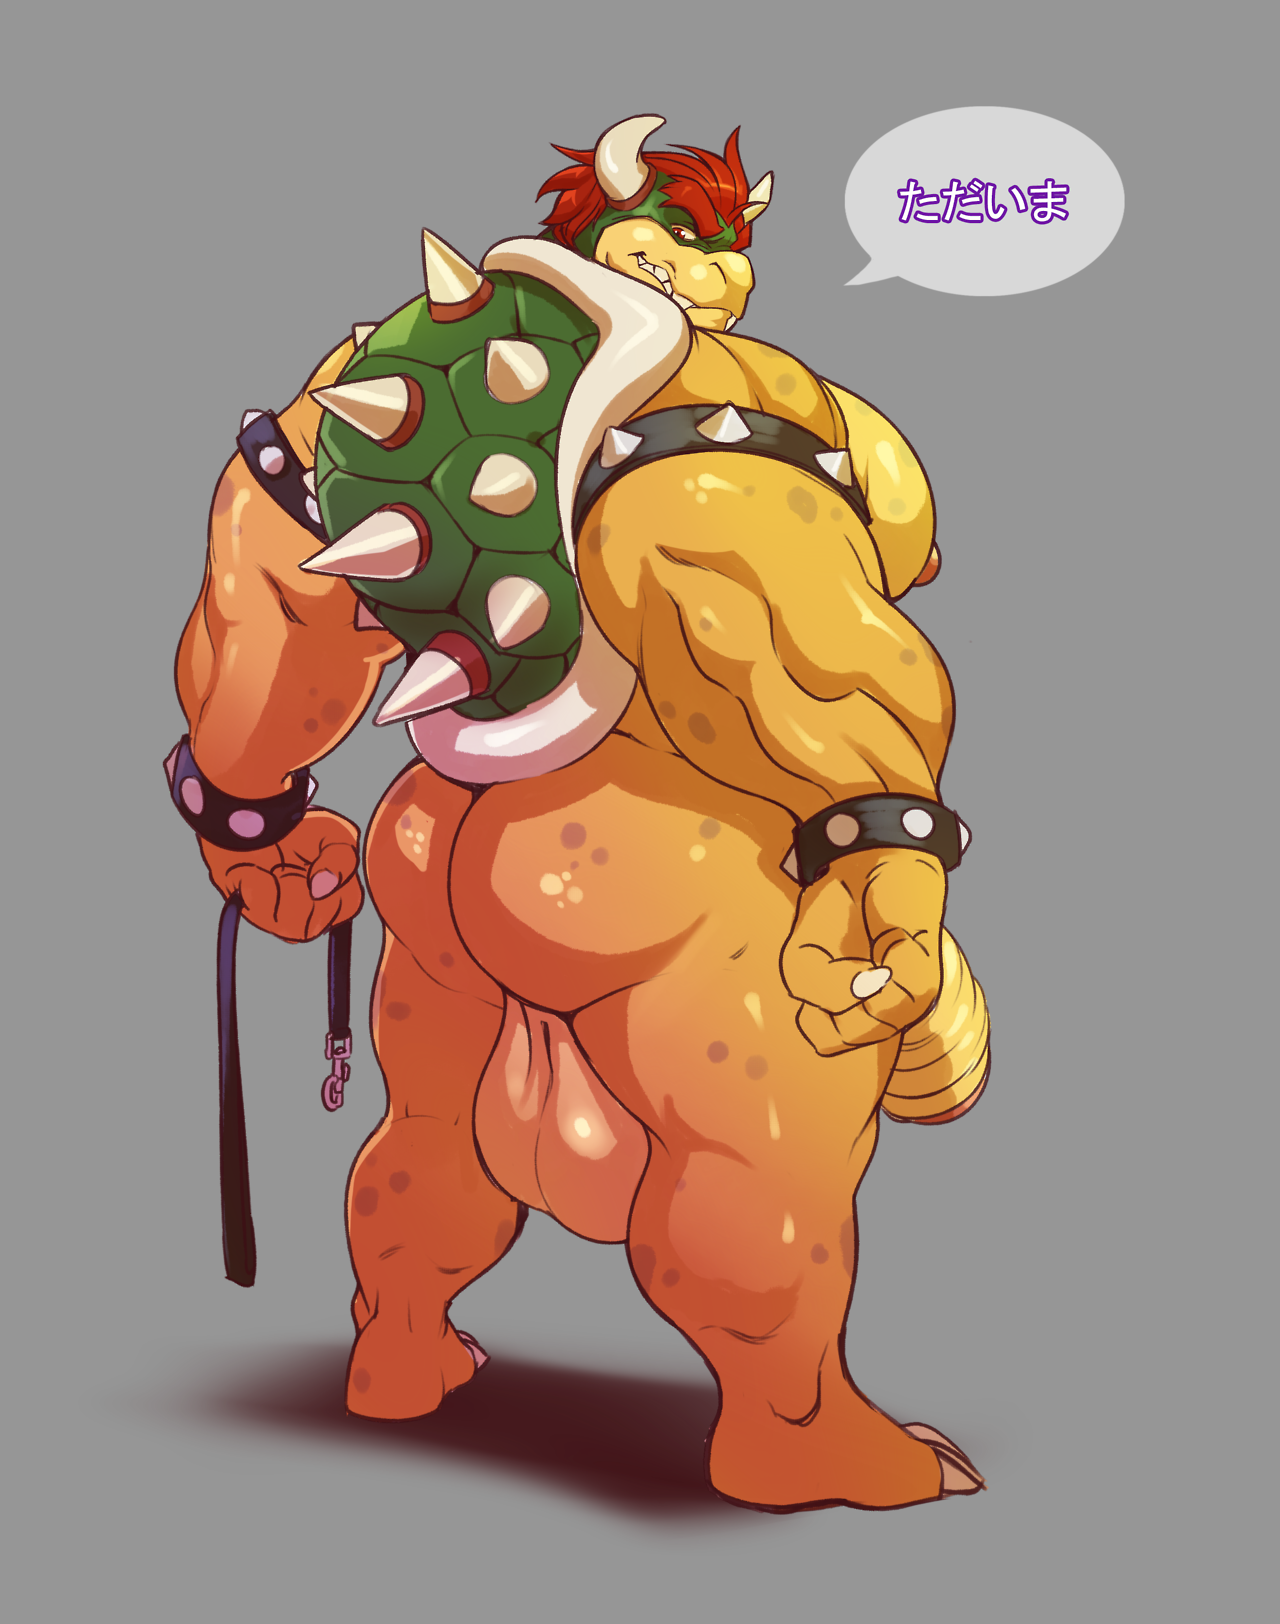 ghosts-go-boo: I’m not even sorry. A very lewd Bowser. I’m not officially furry